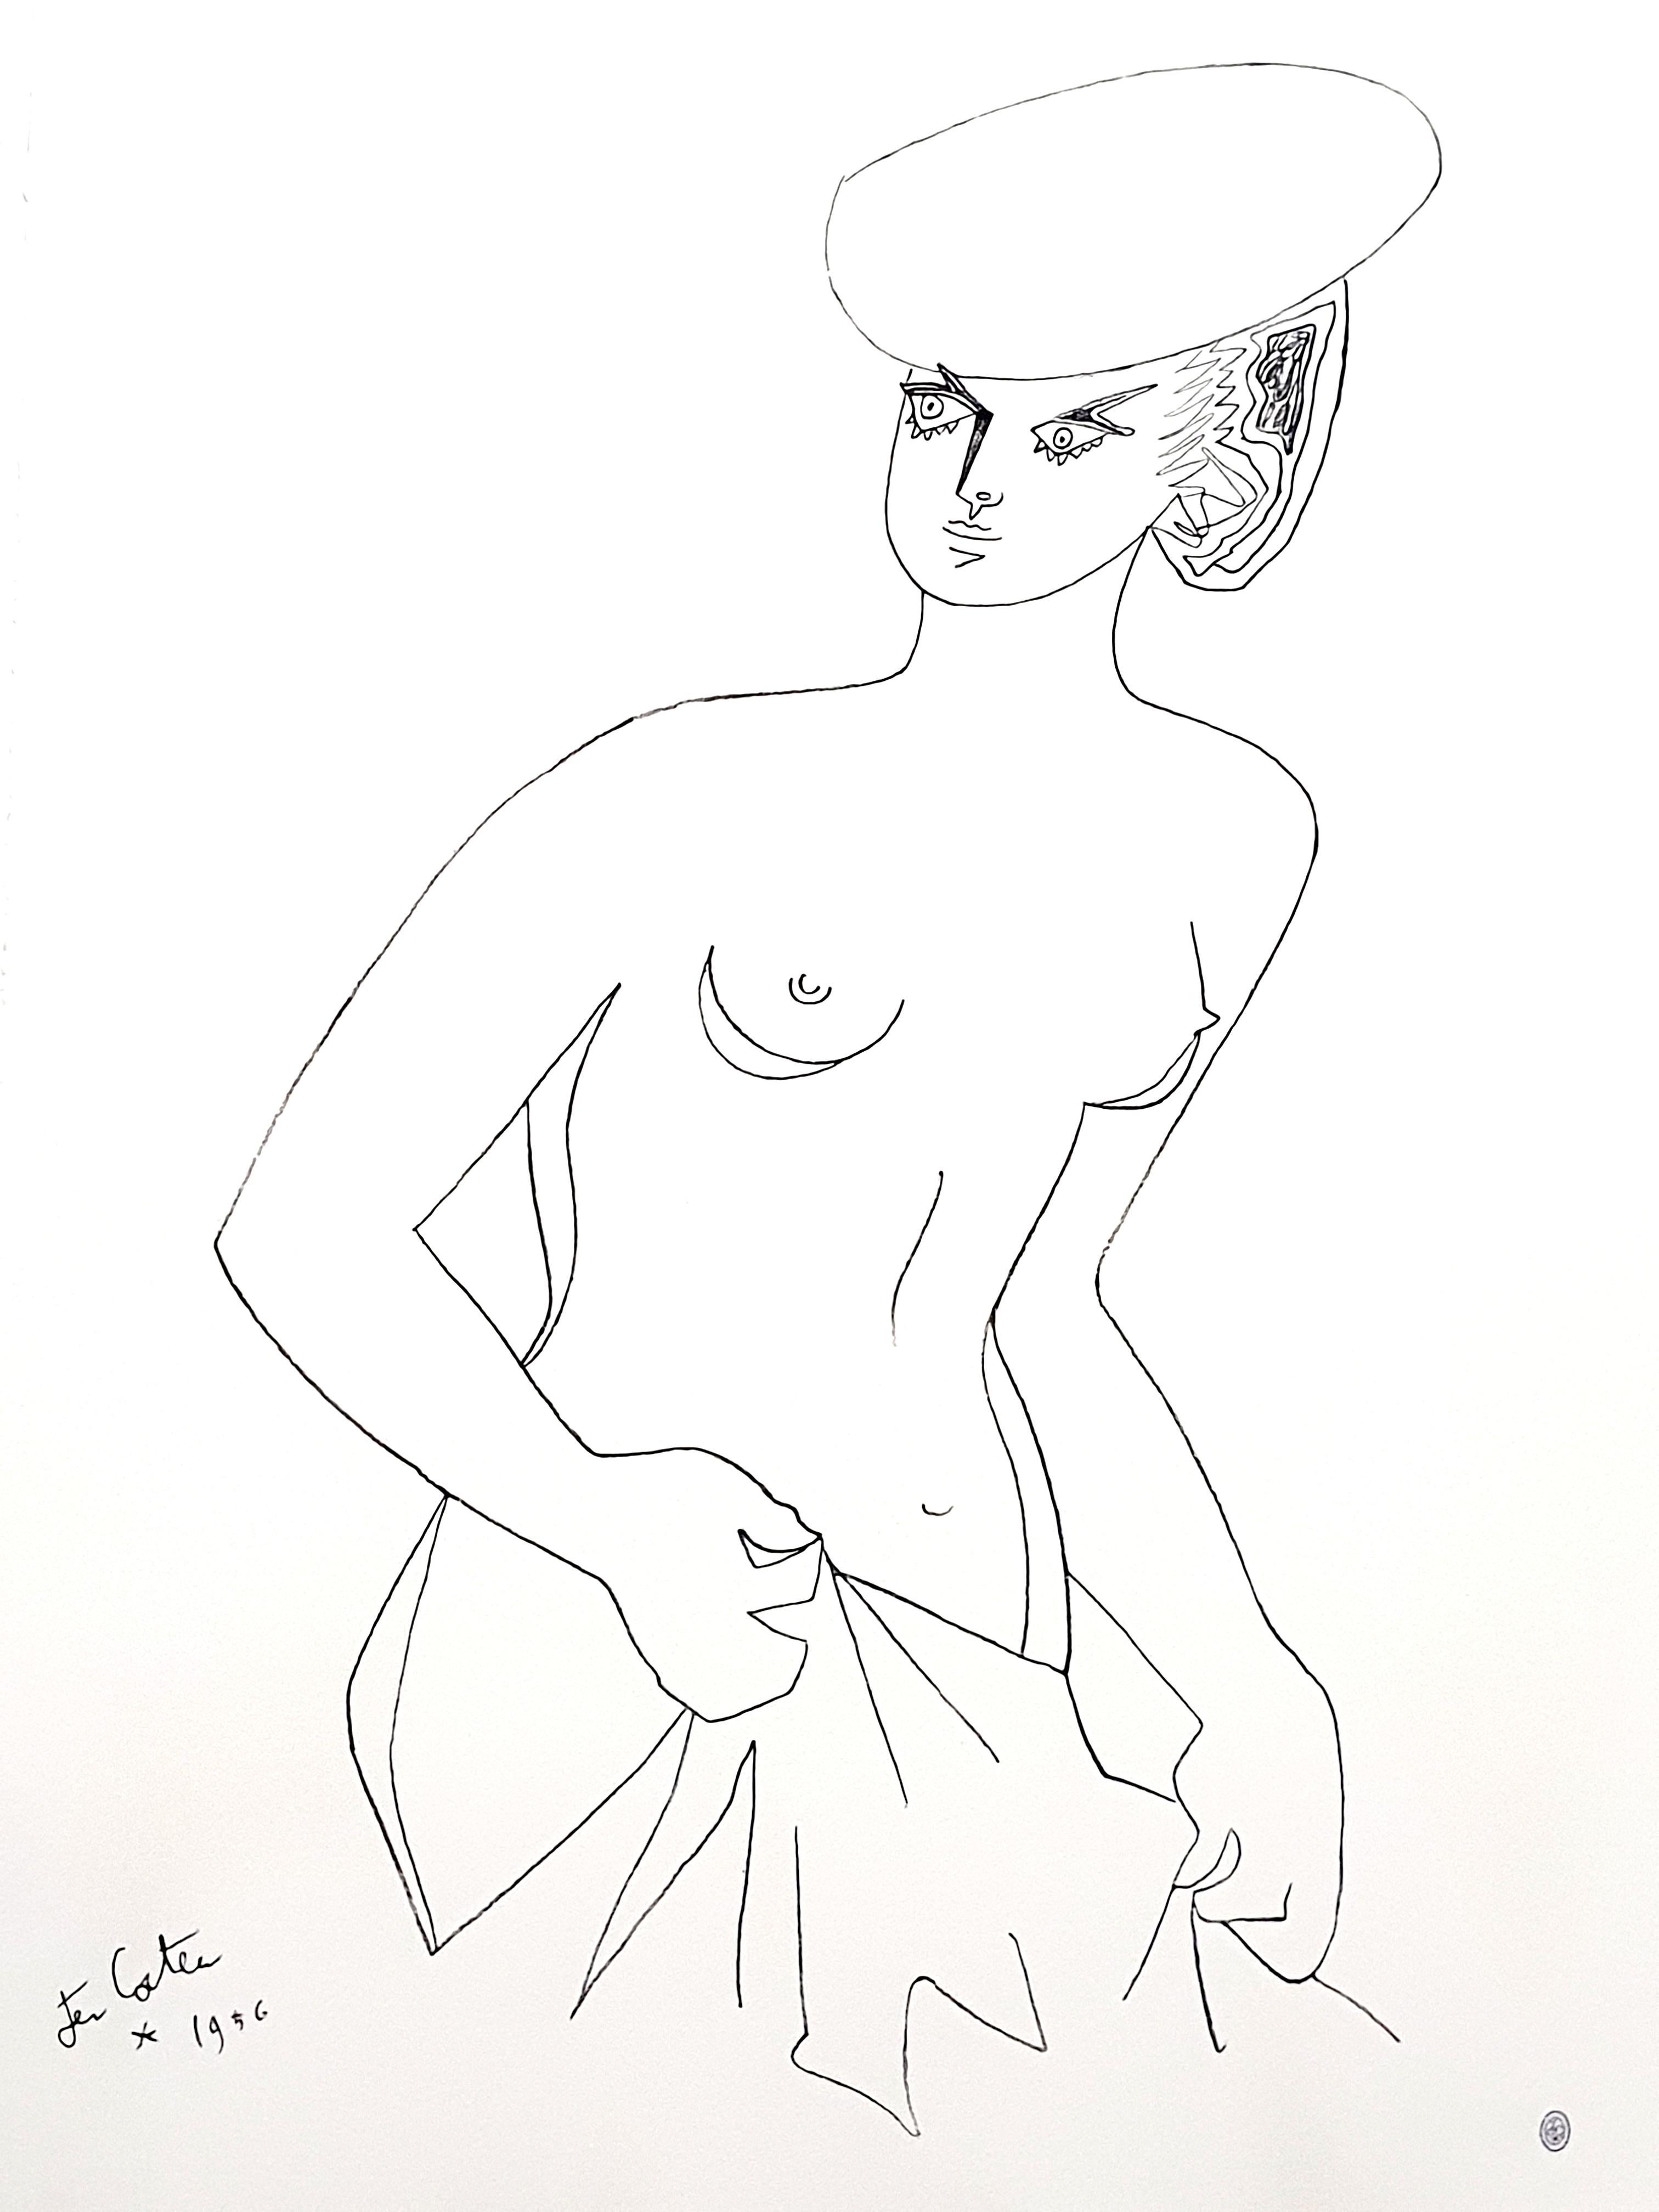 Original Lithograph by Jean Cocteau
Title: Actress
Signed in the plate
Dimensions: 65 x 44 cm

Jean Cocteau

Writer, artist and film director Jean Cocteau was one of the most influential creative figures in the Parisian avant-garde between the two